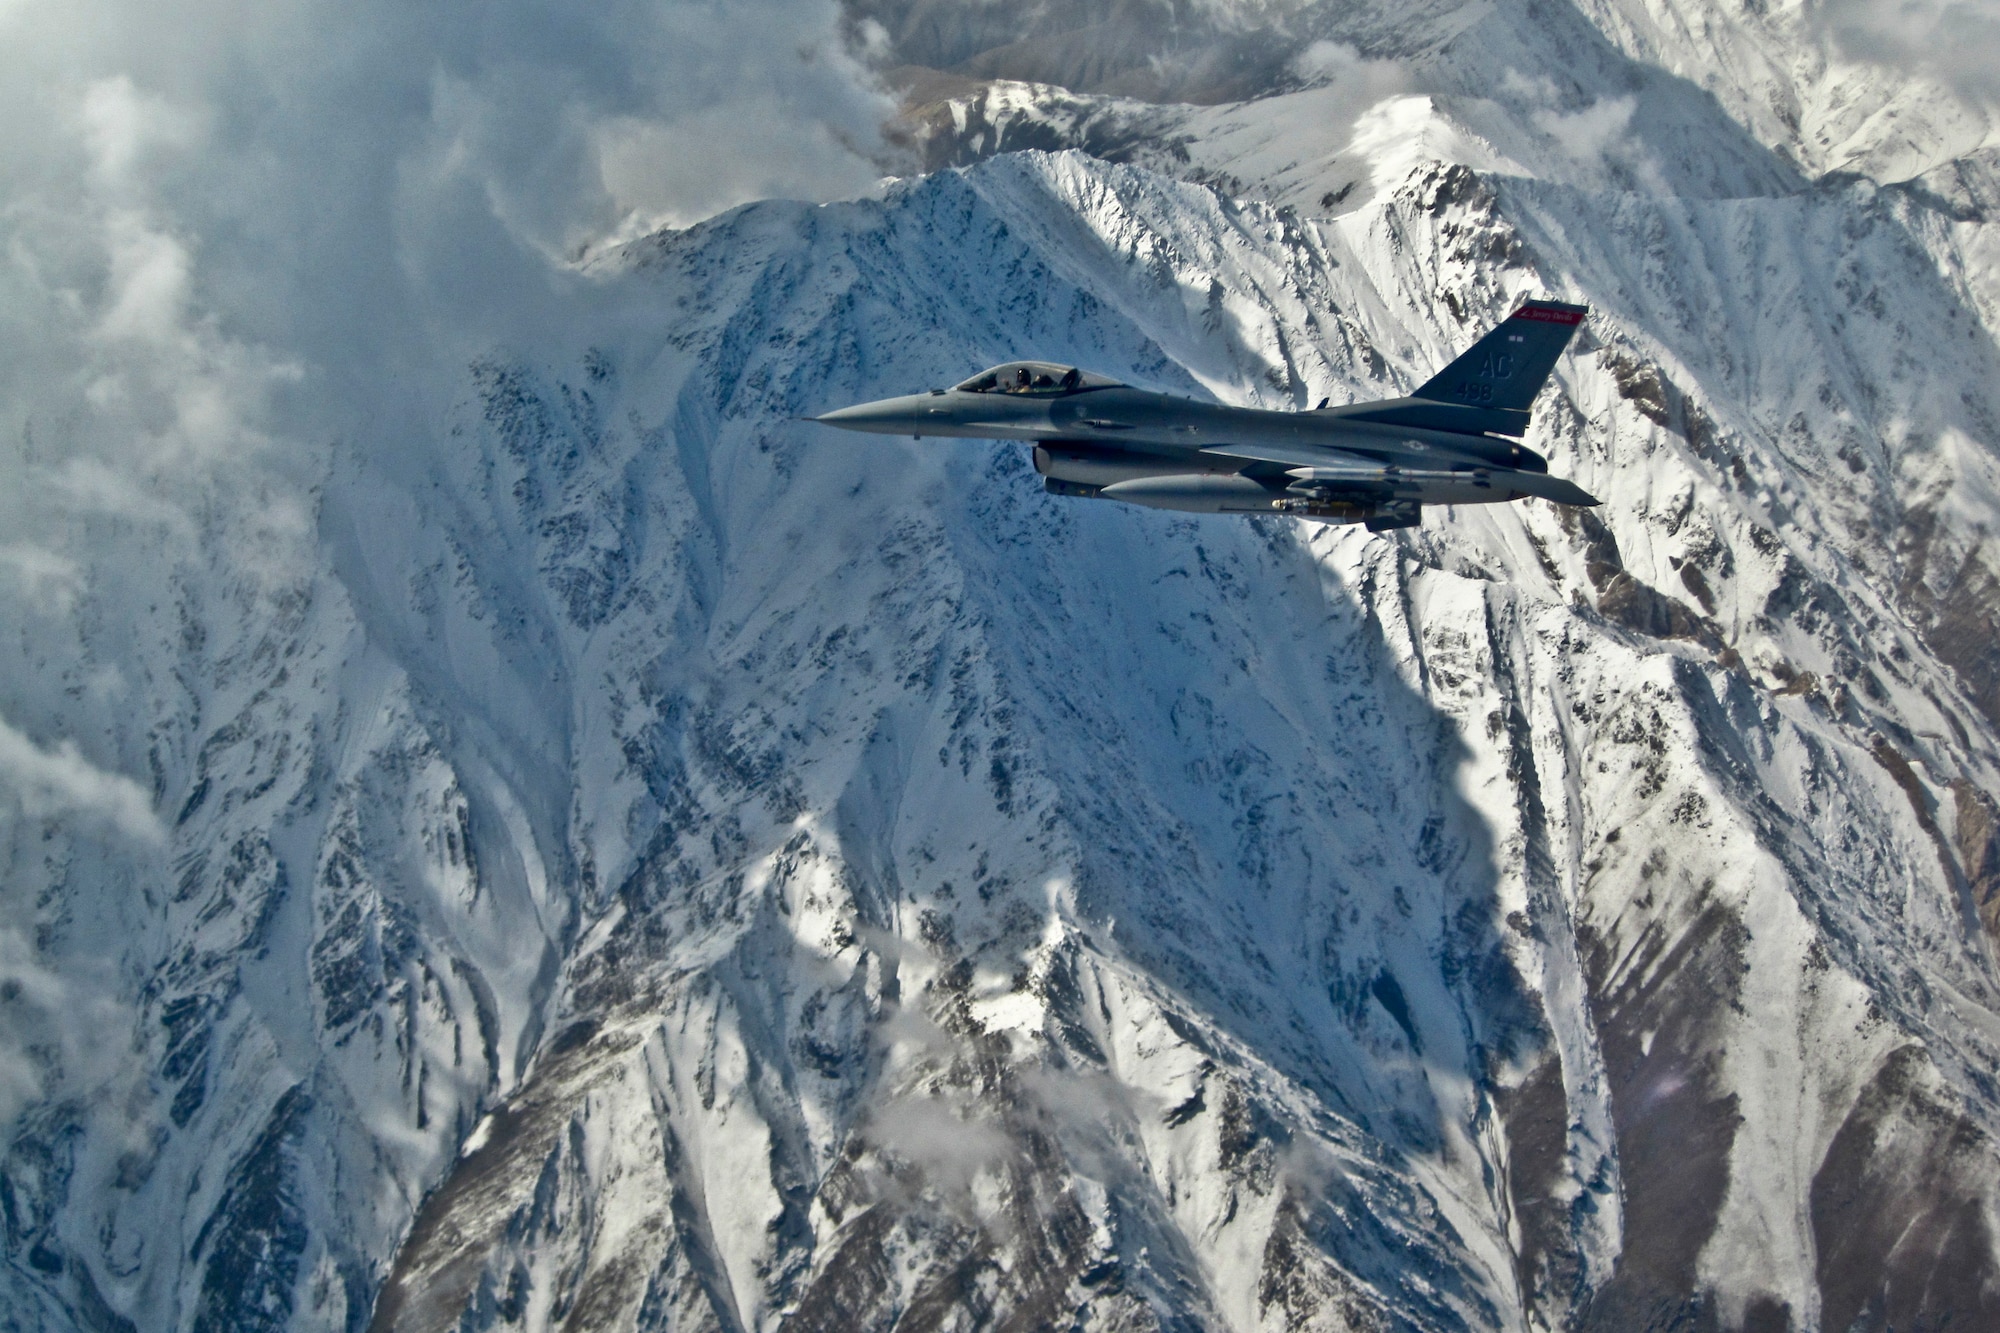 An F-16C Fighting Falcon with the 177th Fighter Wing, New Jersey Air National Guard, on a mission in Afghanistan on Oct. 23, 2011. (U.S. Air Force photo)